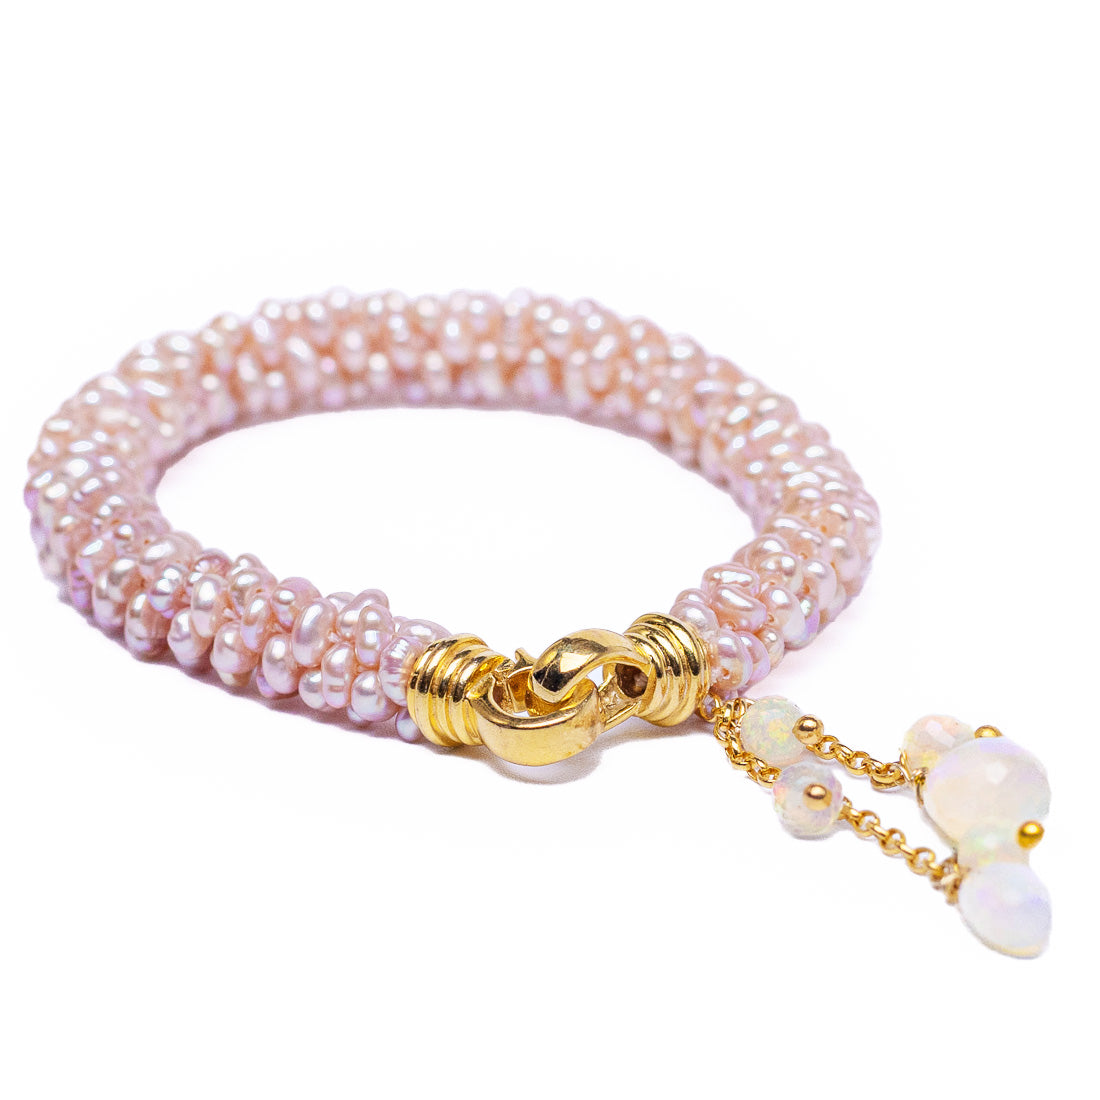 Exclusive Handwoven Tiny Pink Seed Pearl Bracelet with Welo Fire Opal Tassel